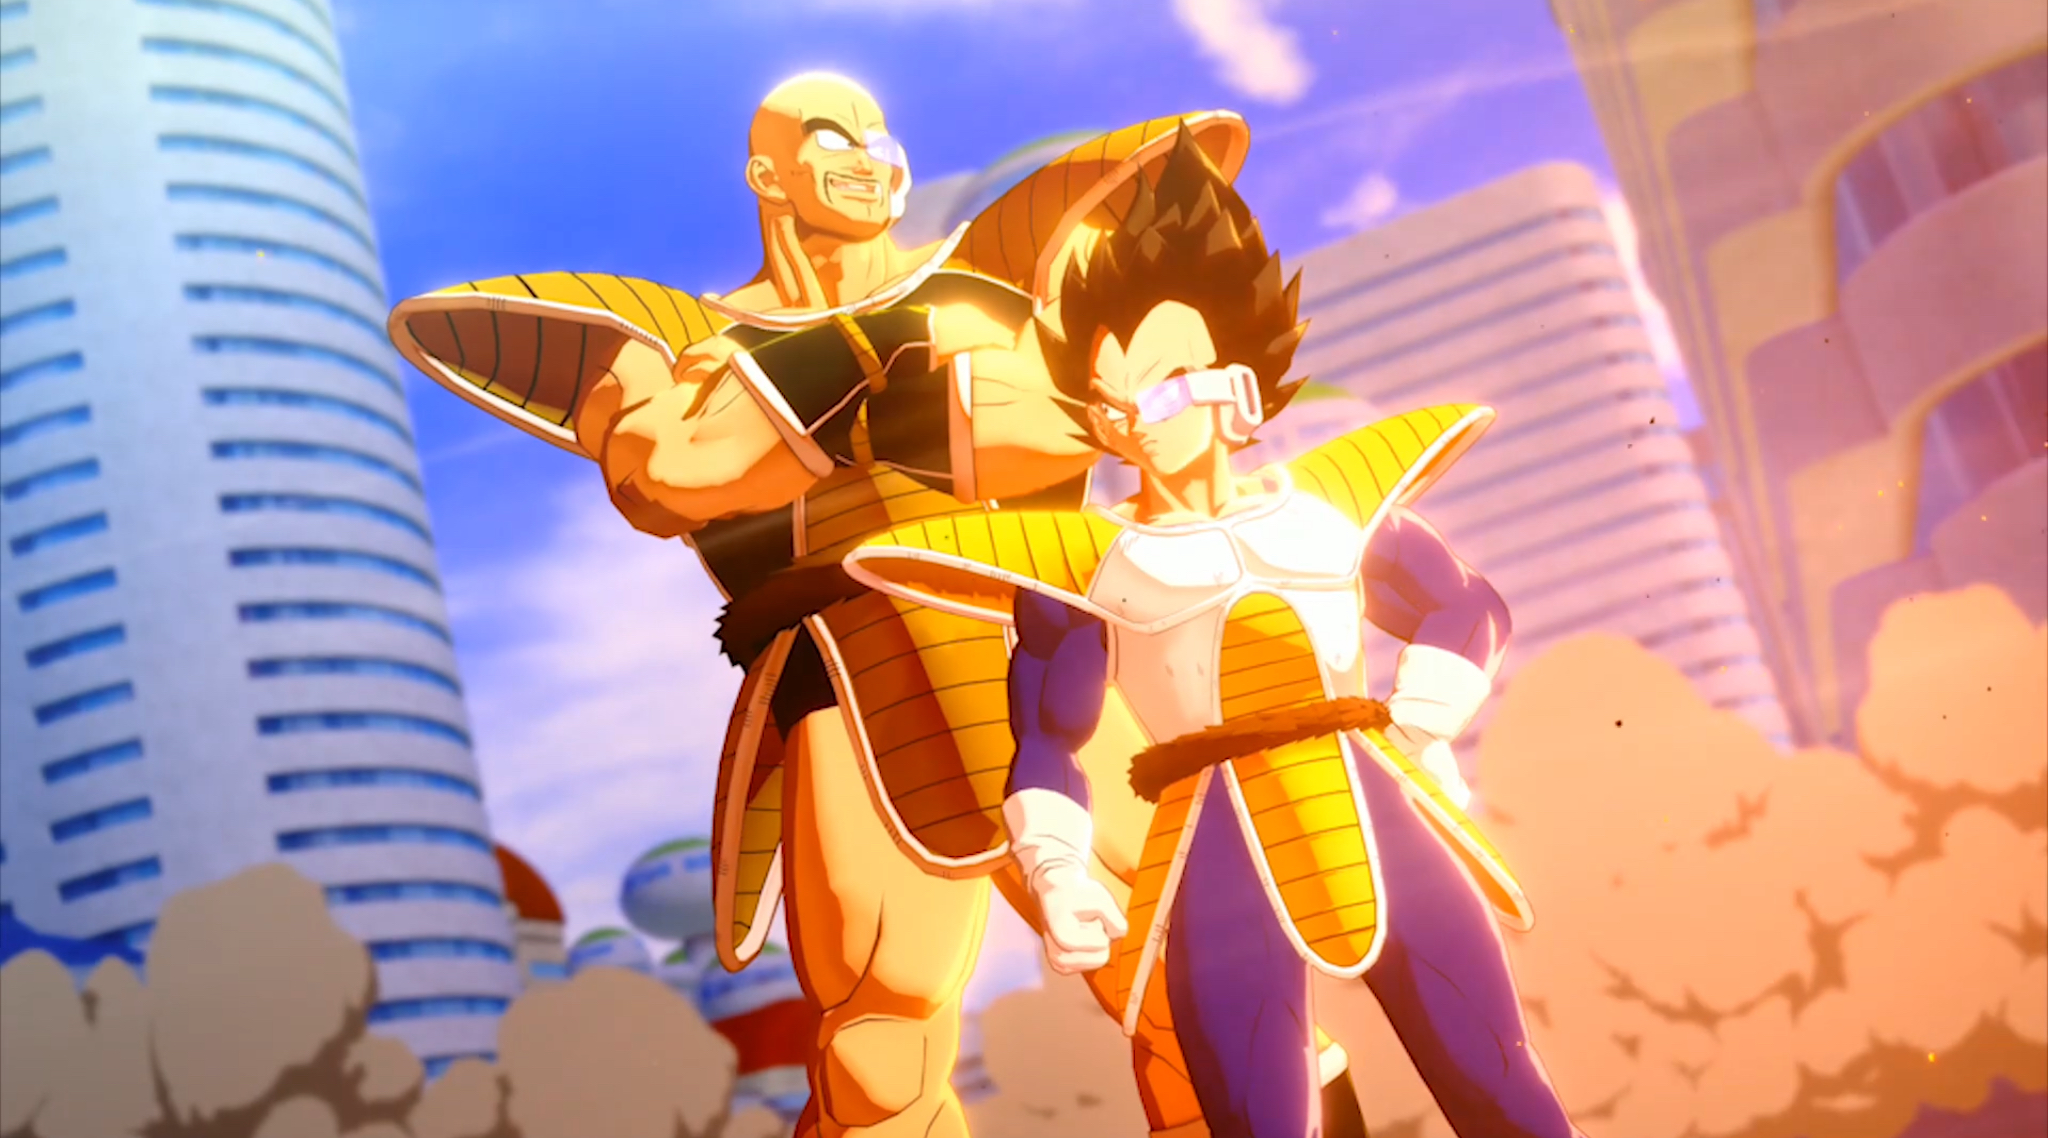 E3 2019: DRAGON BALL Z: KAKAROT From Bandai Namco Entertainment Gets a New Trailer With Release ...